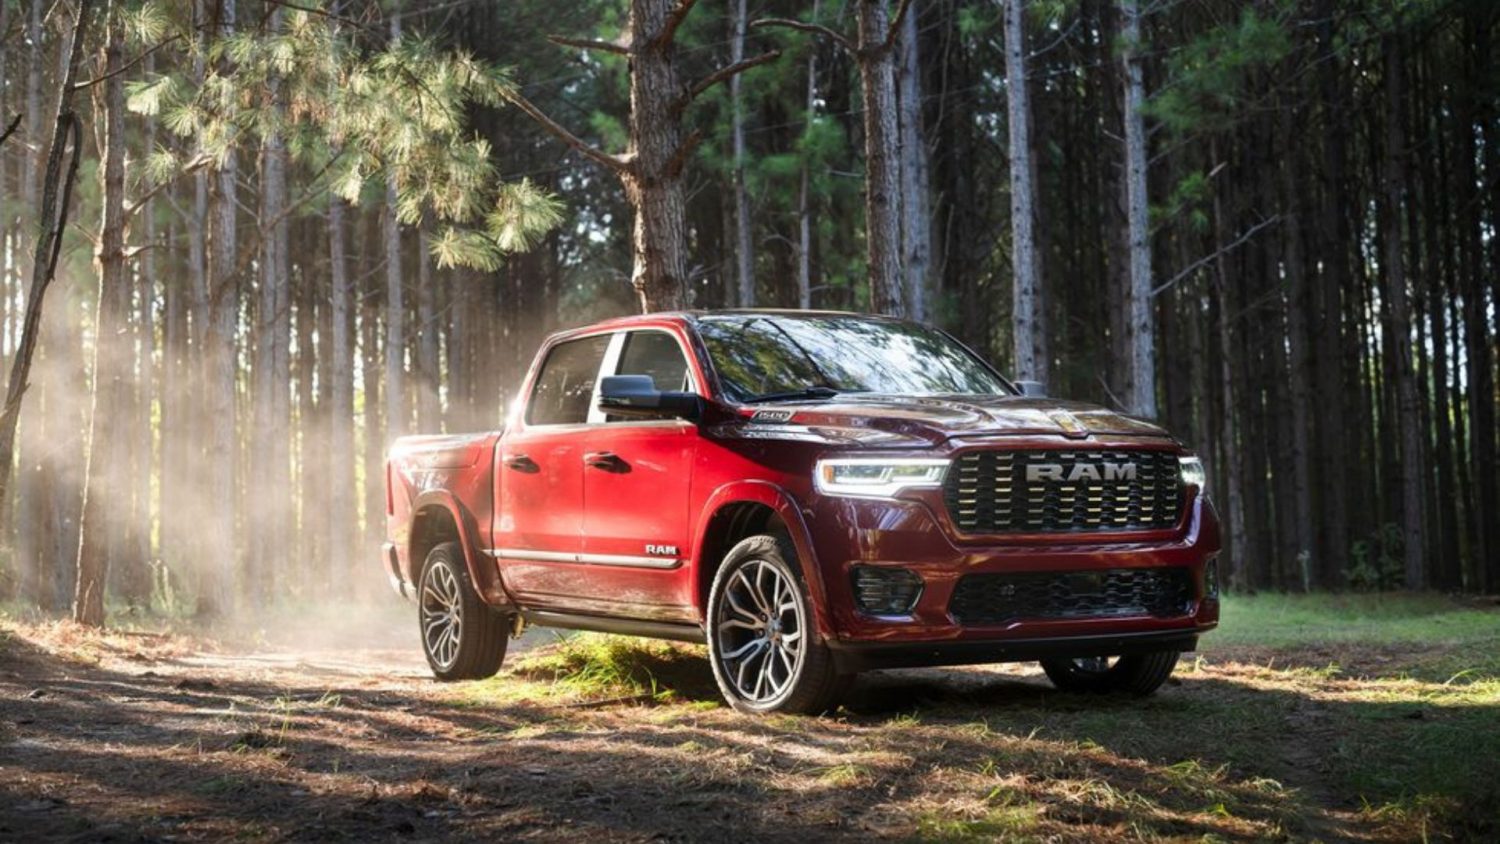 Stellantis revealed its "Game-changing" Ram 1500 Ramcharger that's equipped with an electric generator and a gas engine.